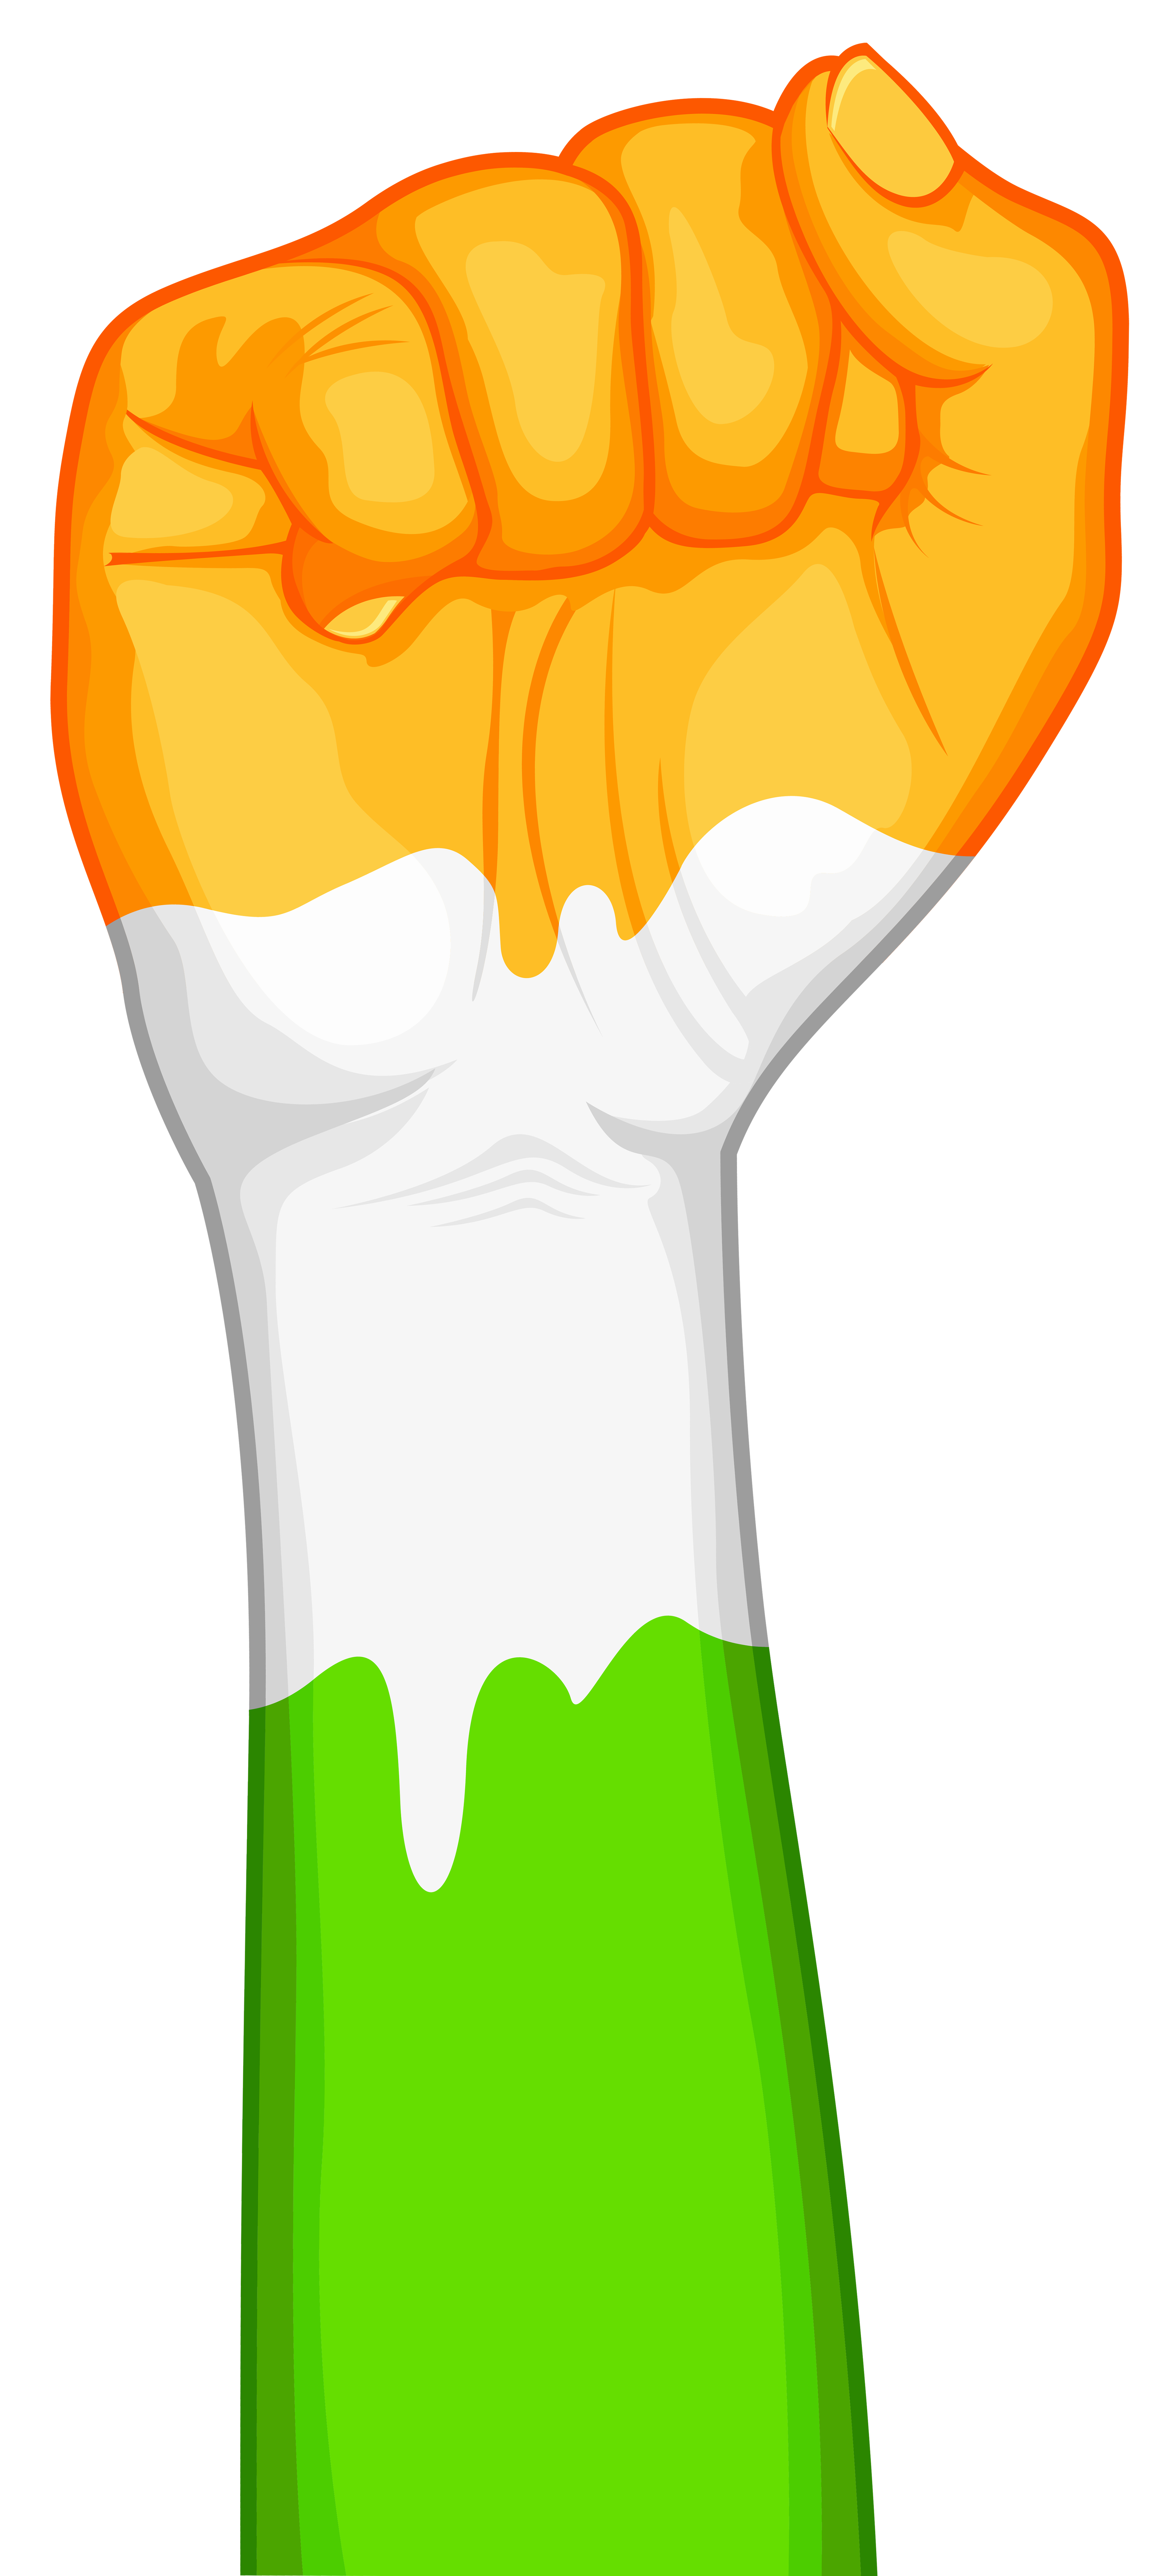 India Fist Transparent PNG Image | Gallery Yopriceville - High-Quality Images and ...3590 x 8000